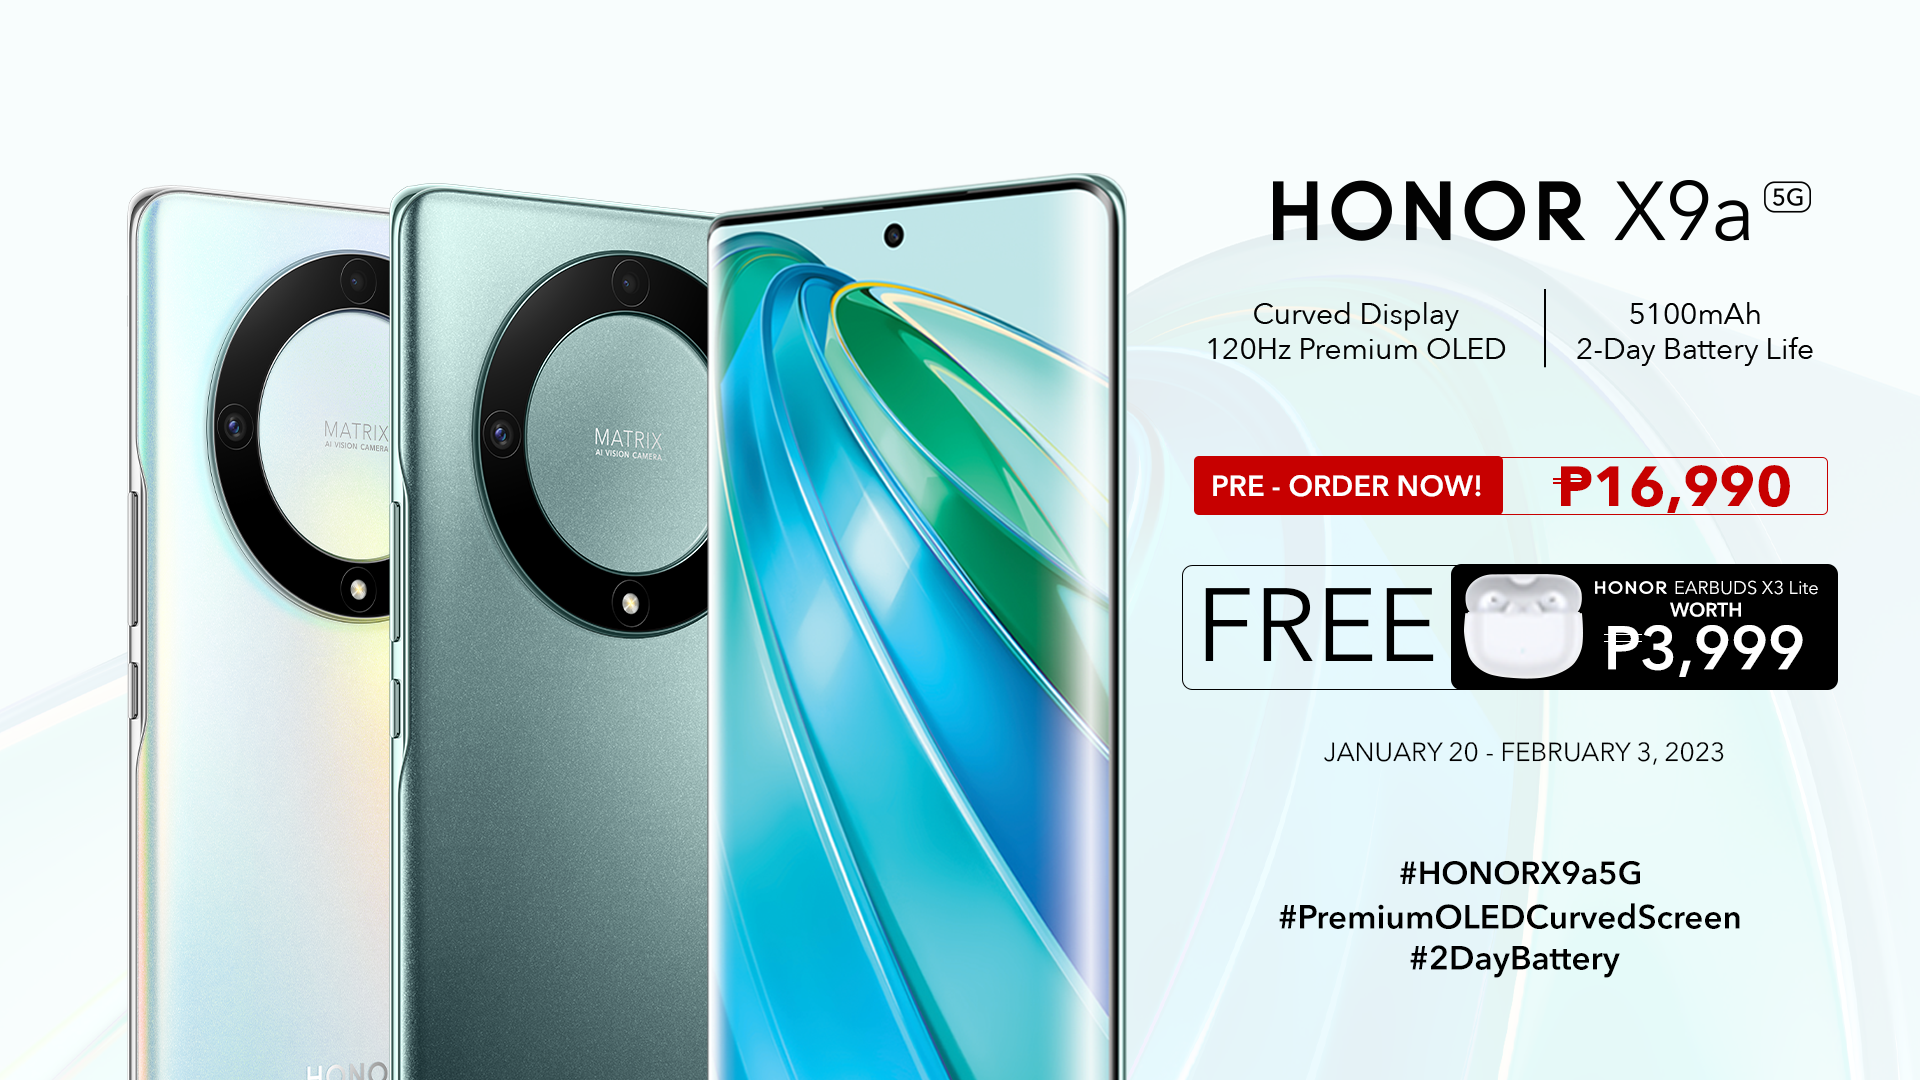 HONOR X9a 5G now and get a FREE HONOR Earbuds X3 Lite